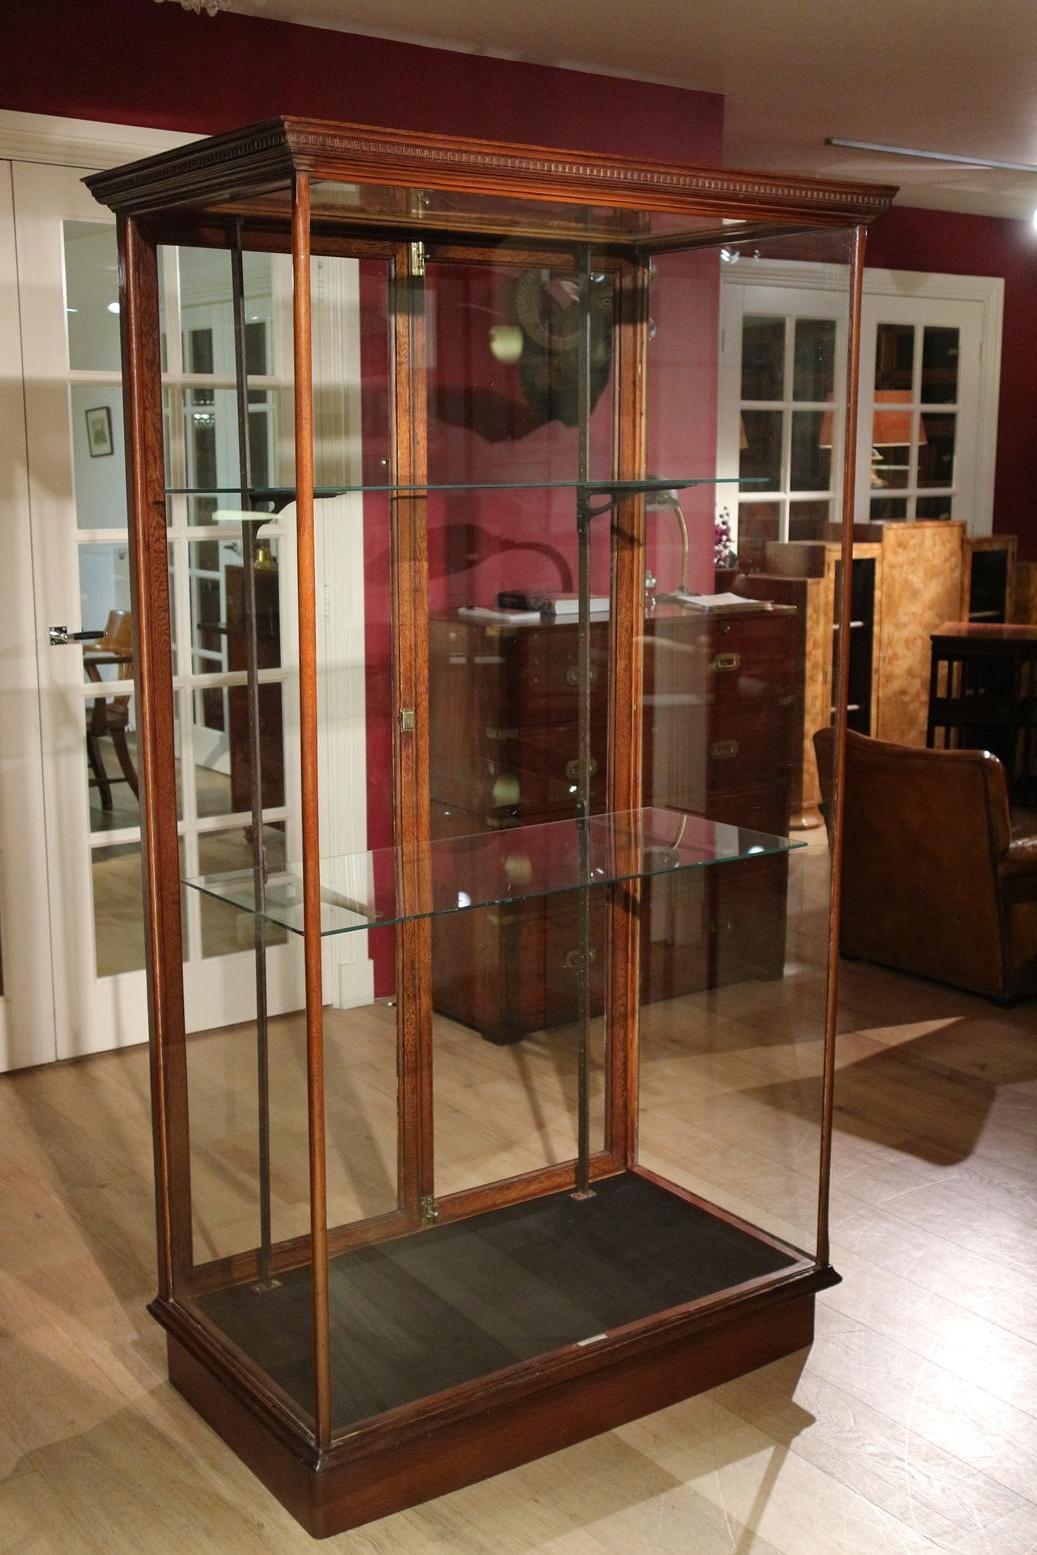 Beautiful antique mahogany display in very good condition. Vitrine has 2 adjustable glass shelves. Freestanding model.

Label present of the store and in this case also maker
Withy Grove Stores
24 whitechapel
Liverpool

Origin: